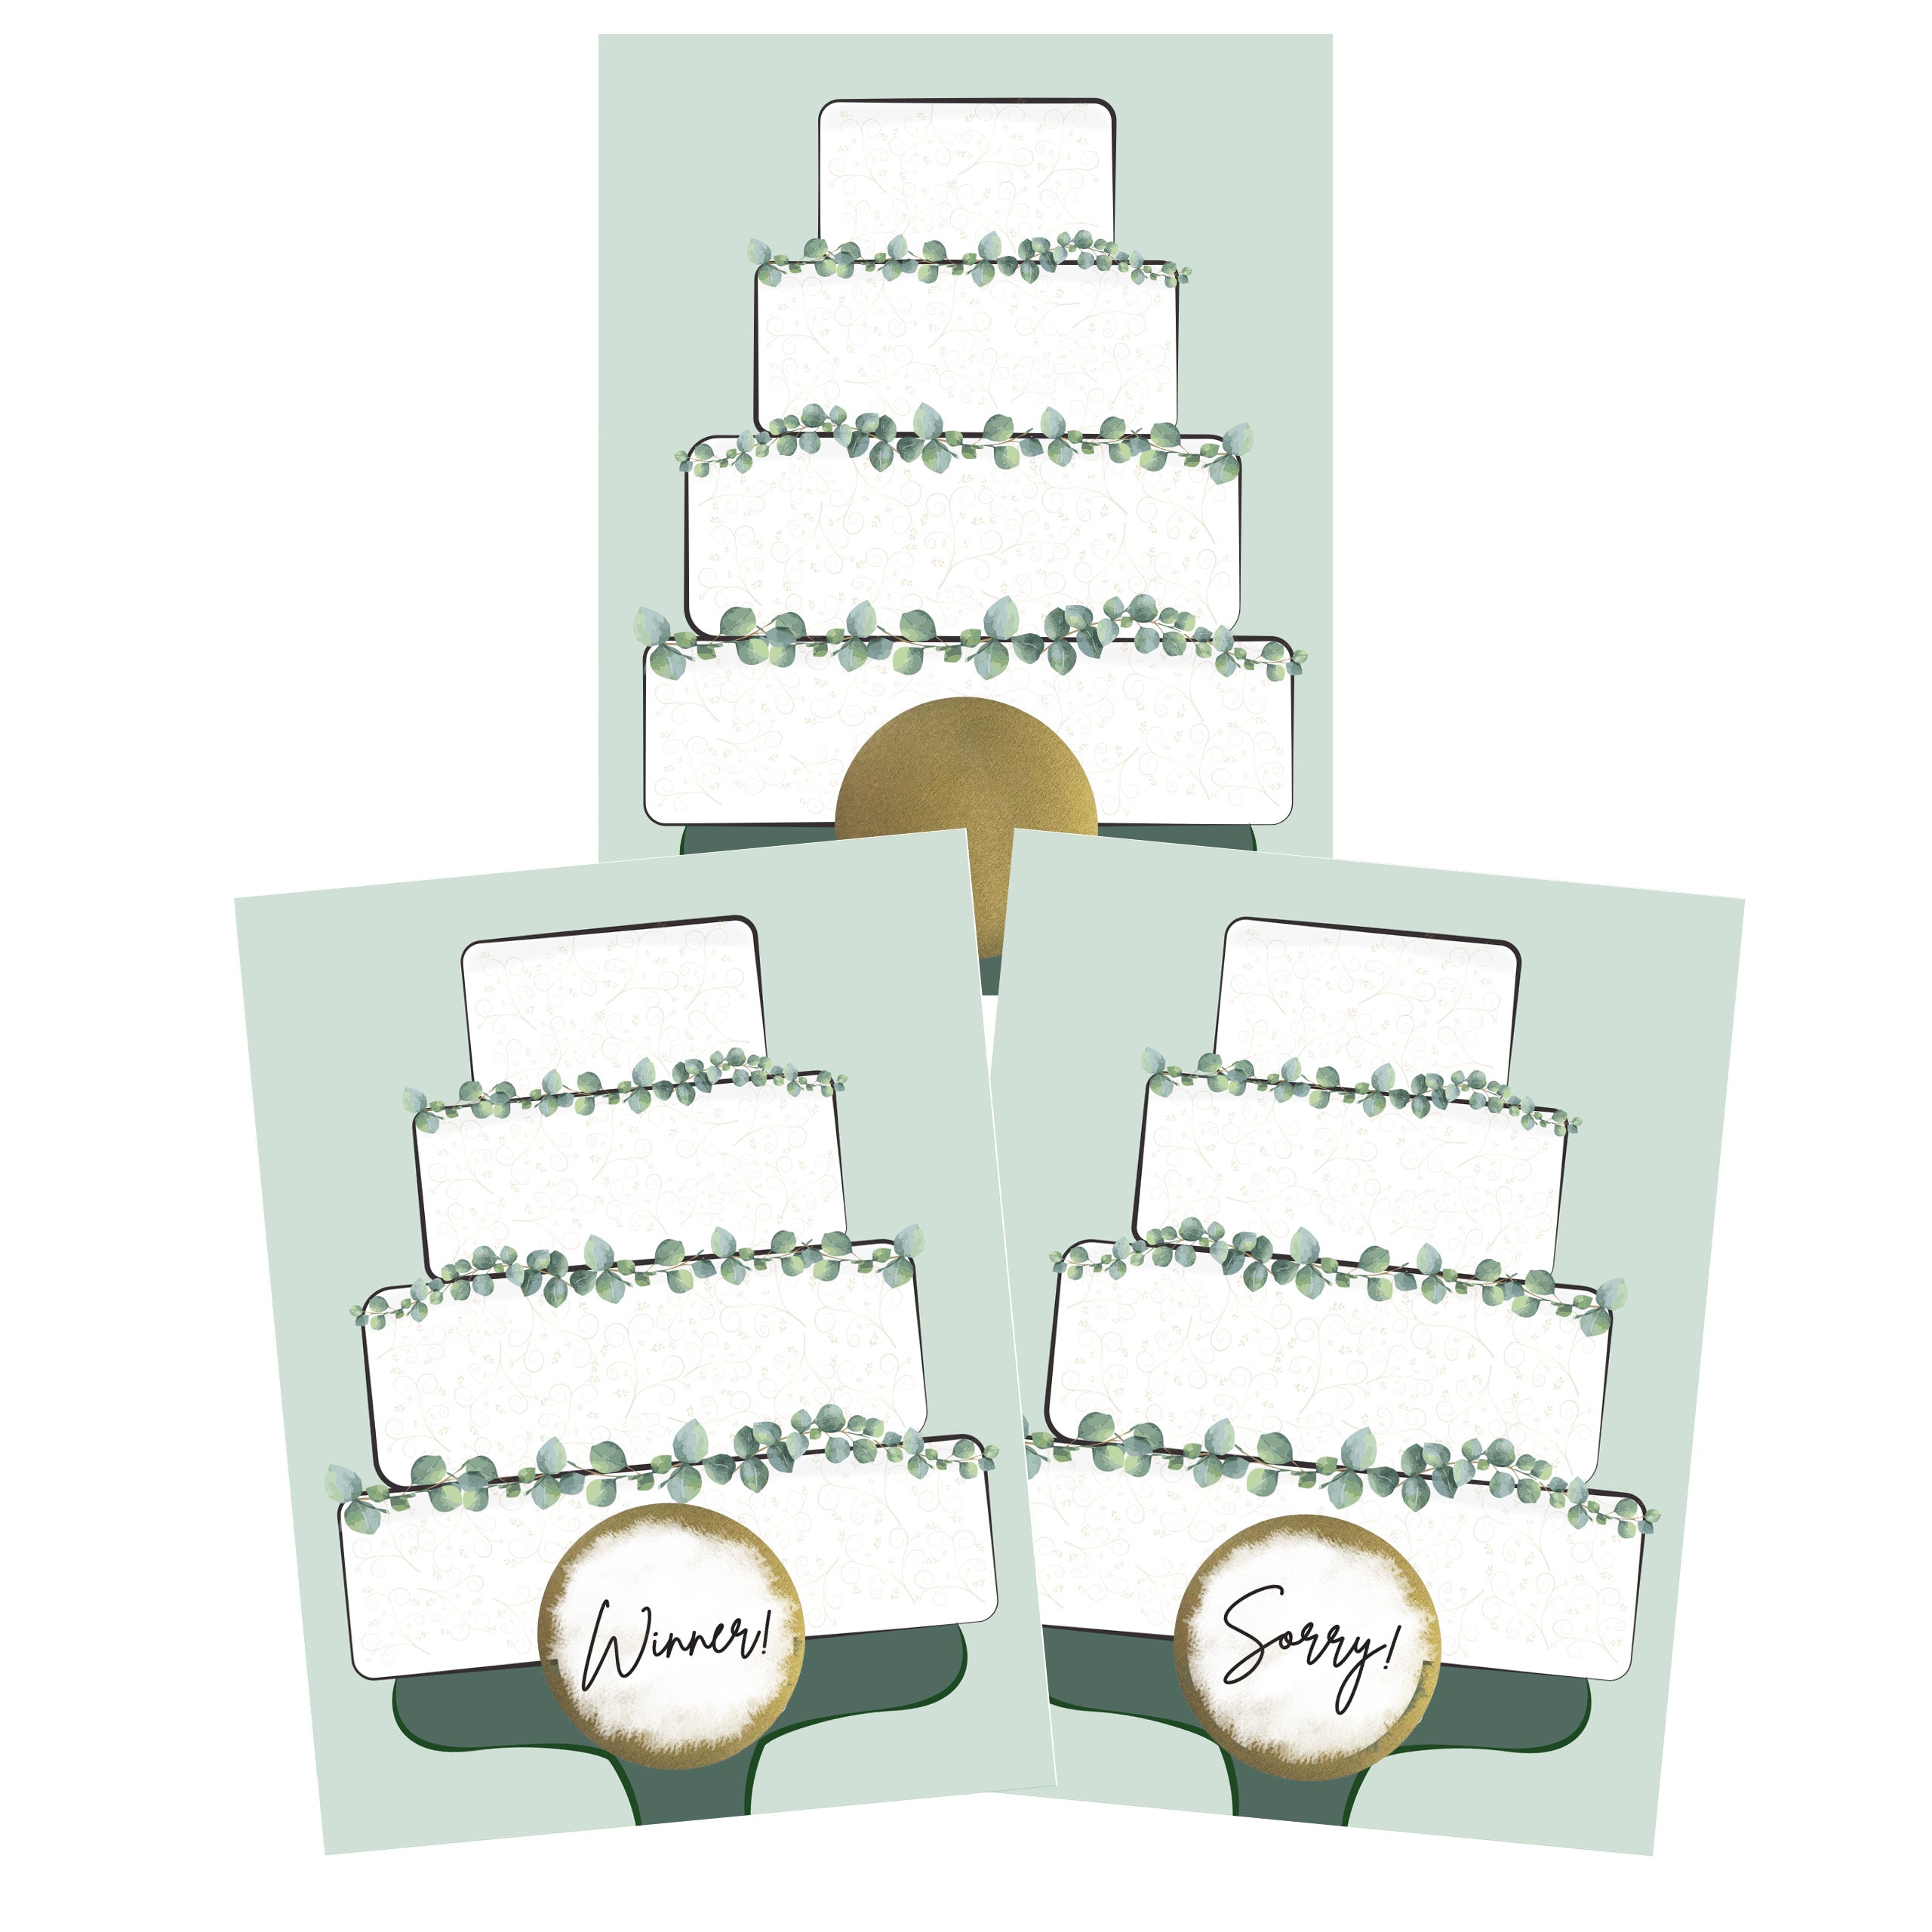 Simple White Wedding Cake Scratch Off Game Cards 26 Pack - 2 Winning and 24 Non-Winning Cards